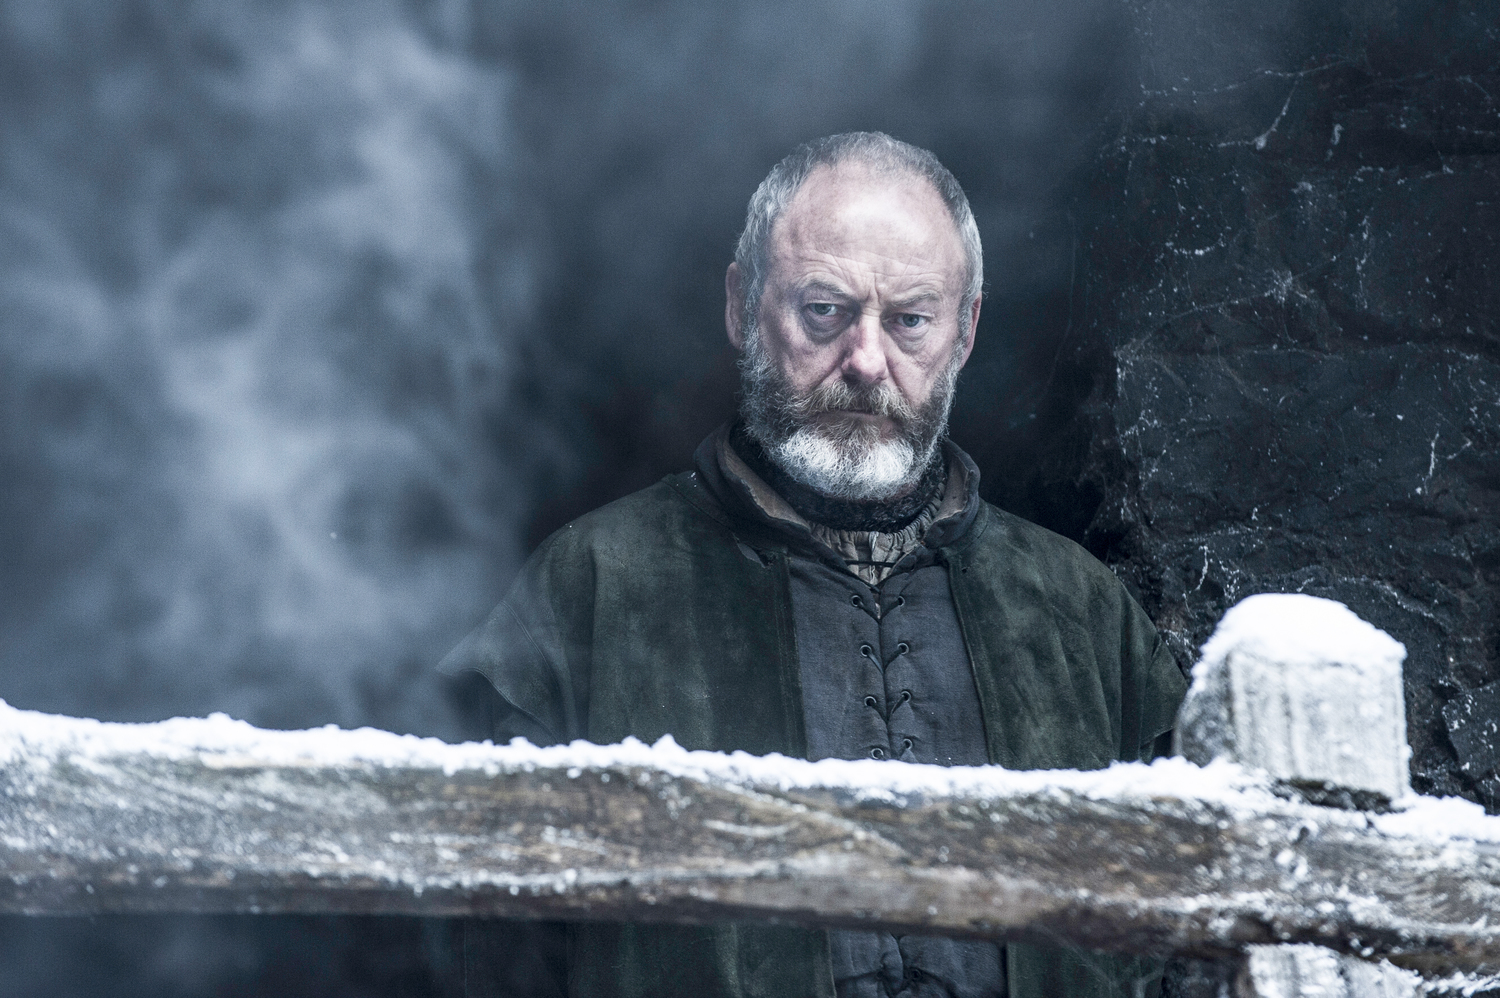 Pics To Get You Excited for Game of Thrones Season 6